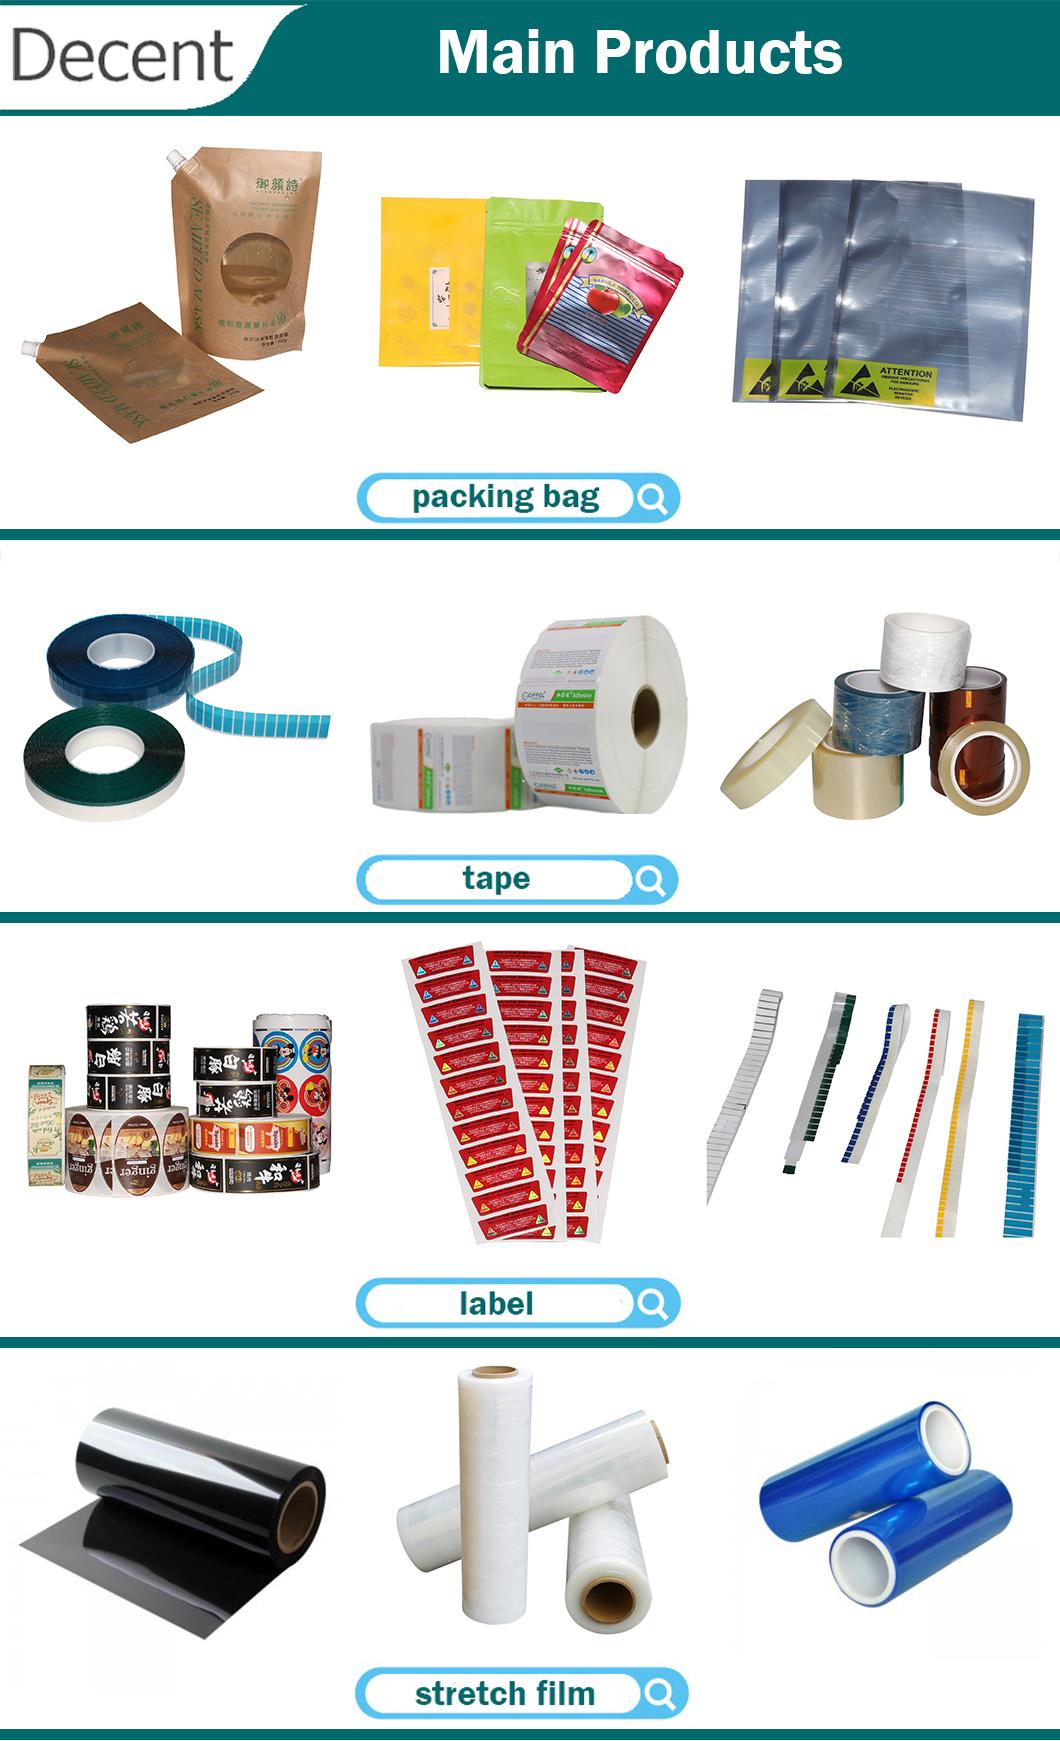 Recyclable and Degradable Restaurant Packaging Bags Customer Wax Paper Bags Brand Paperbag